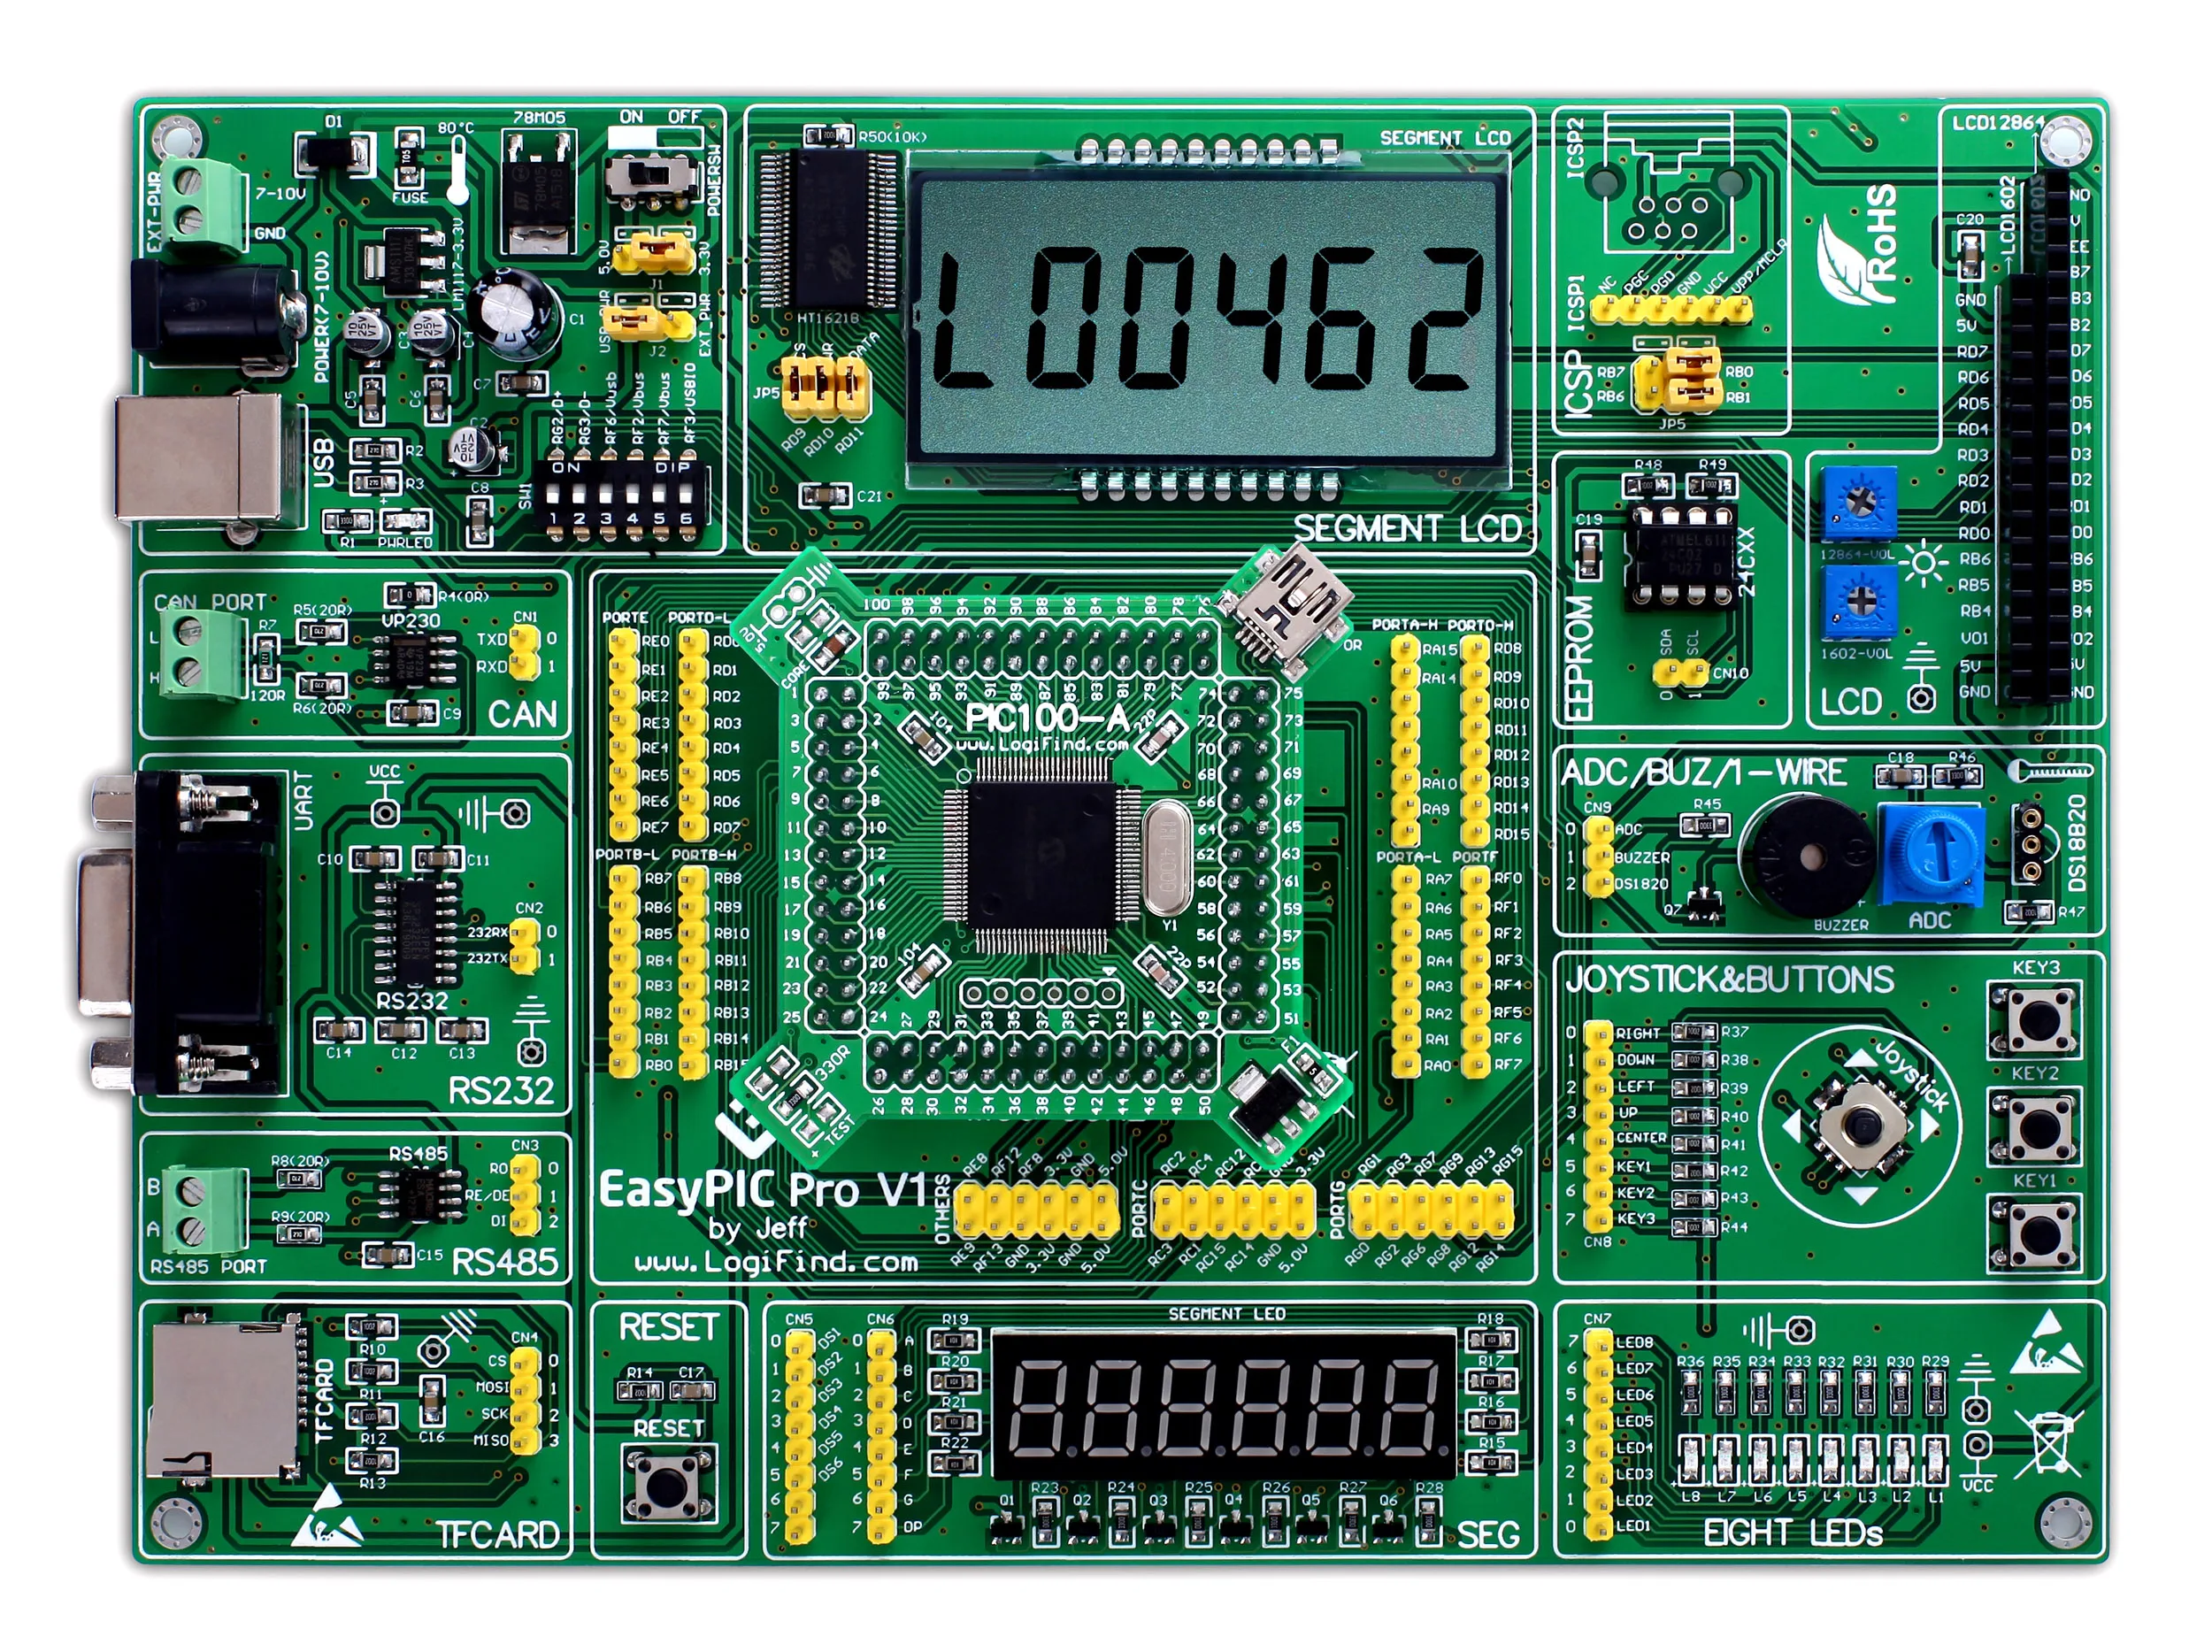 

EasyPIC Pro Learning Evaluation Development Board DsPIC PIC32 PIC24 with PIC32MX795F512L